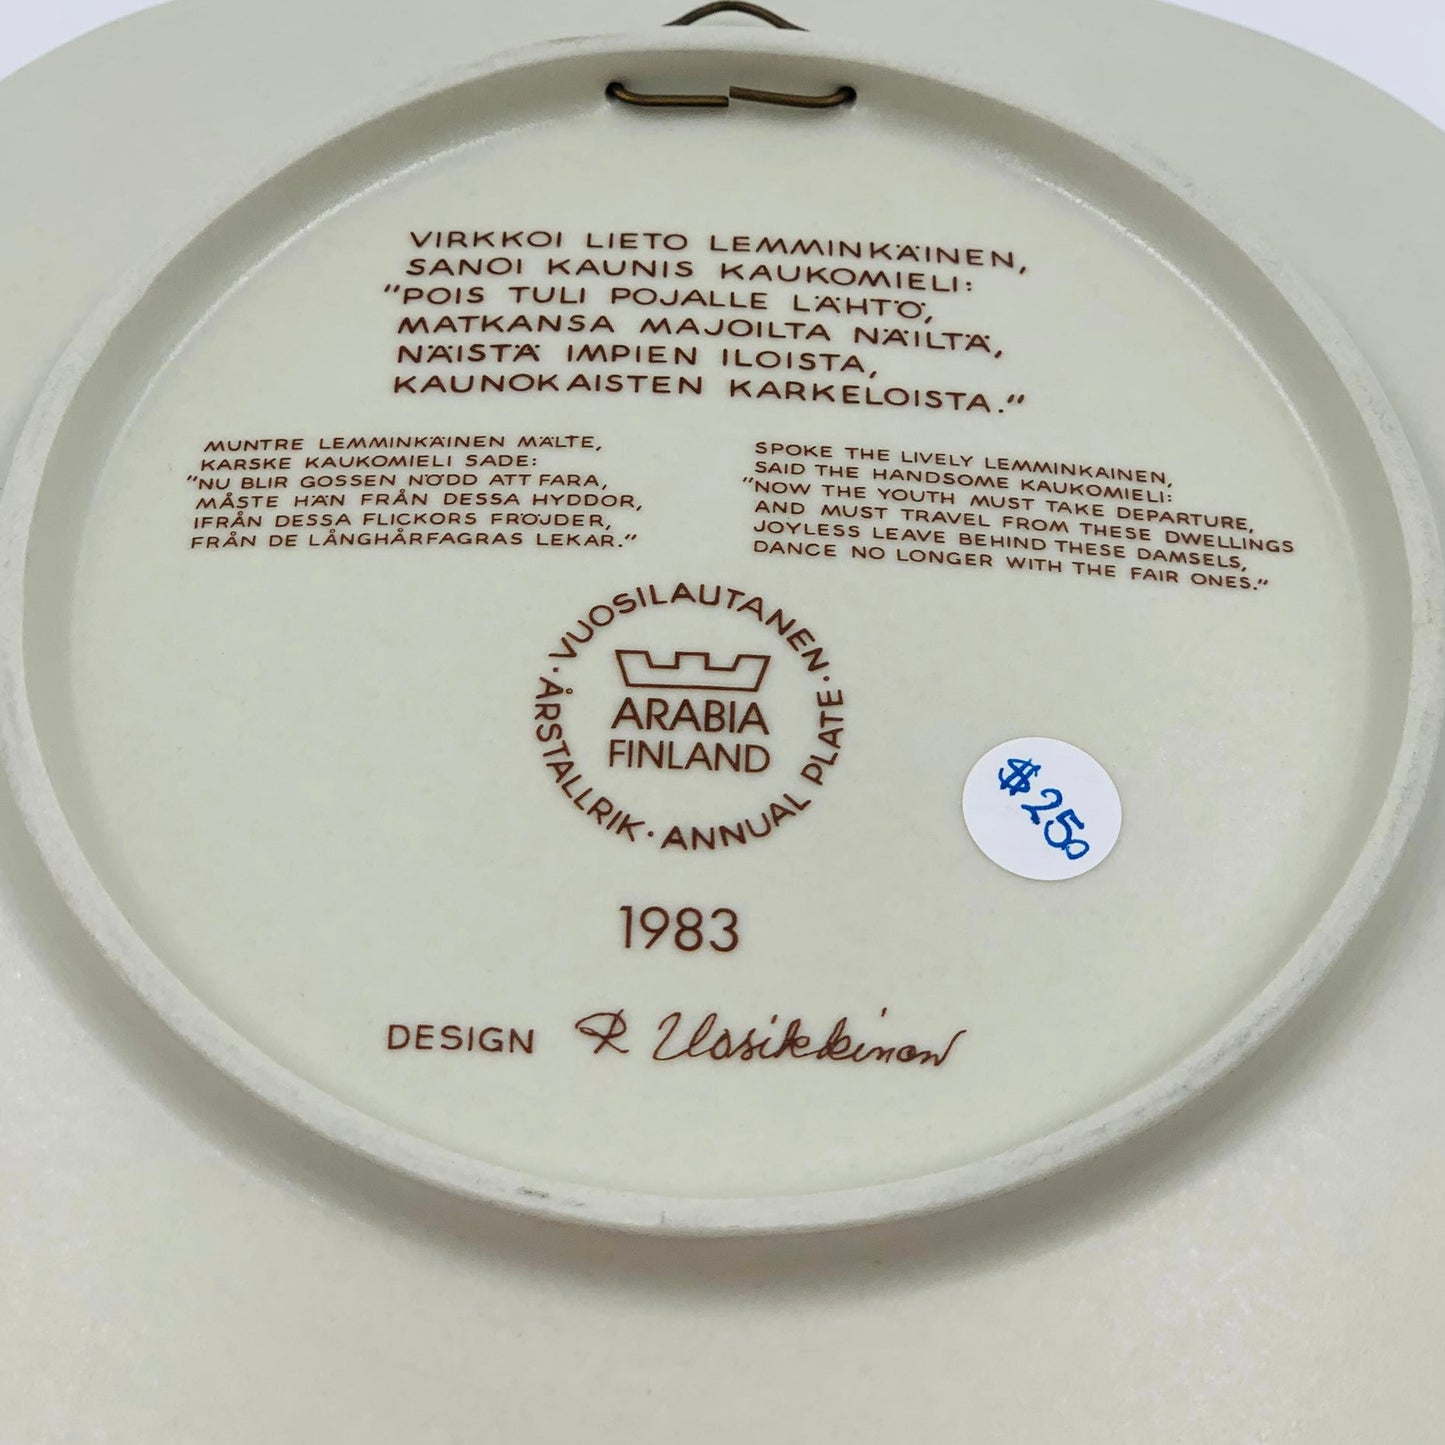 Extremely rare Arabia Finland limited edition annual plate, year 1983